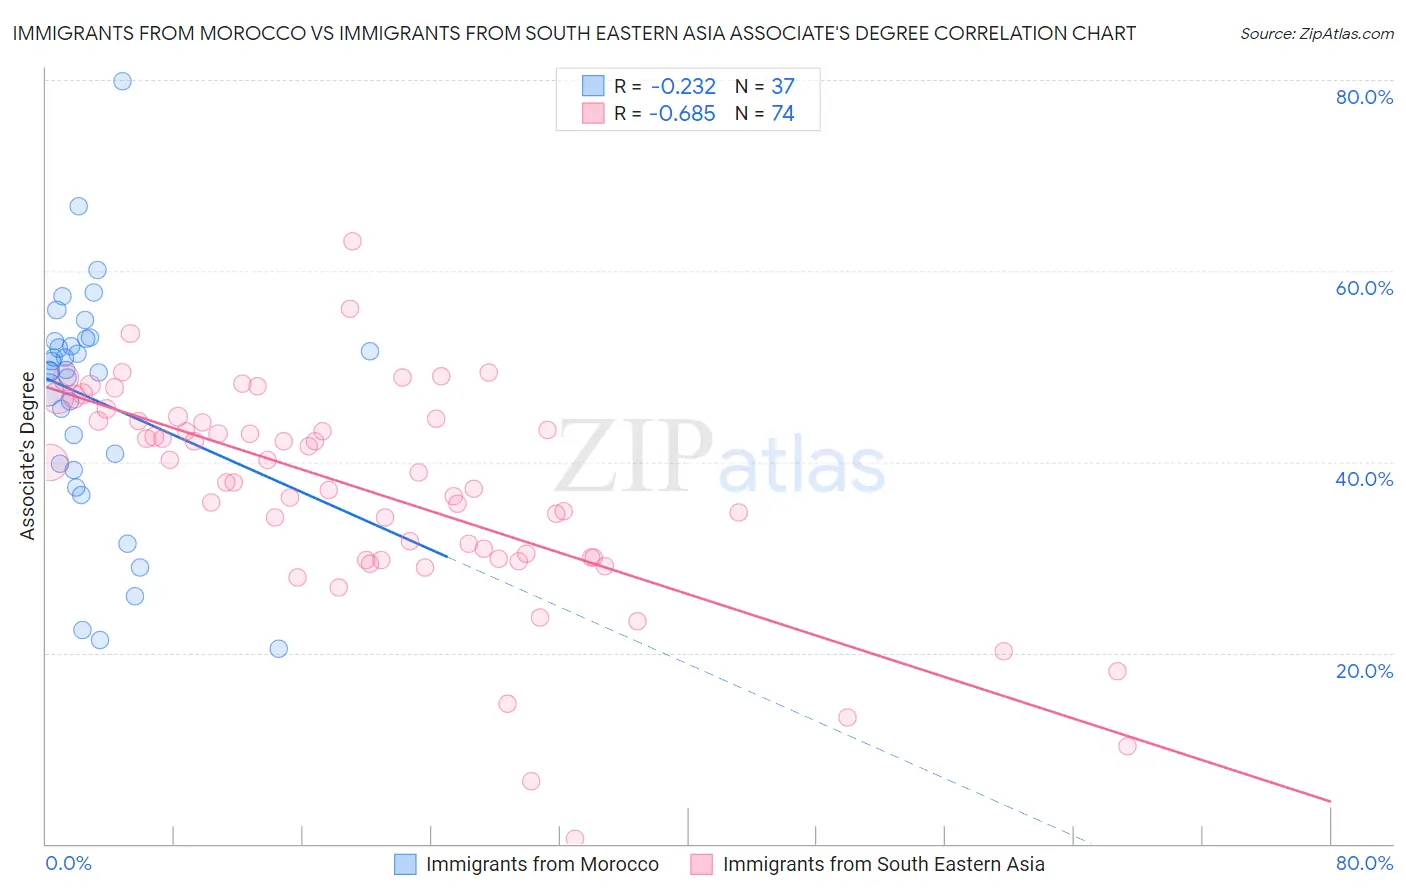 Immigrants from Morocco vs Immigrants from South Eastern Asia Associate's Degree